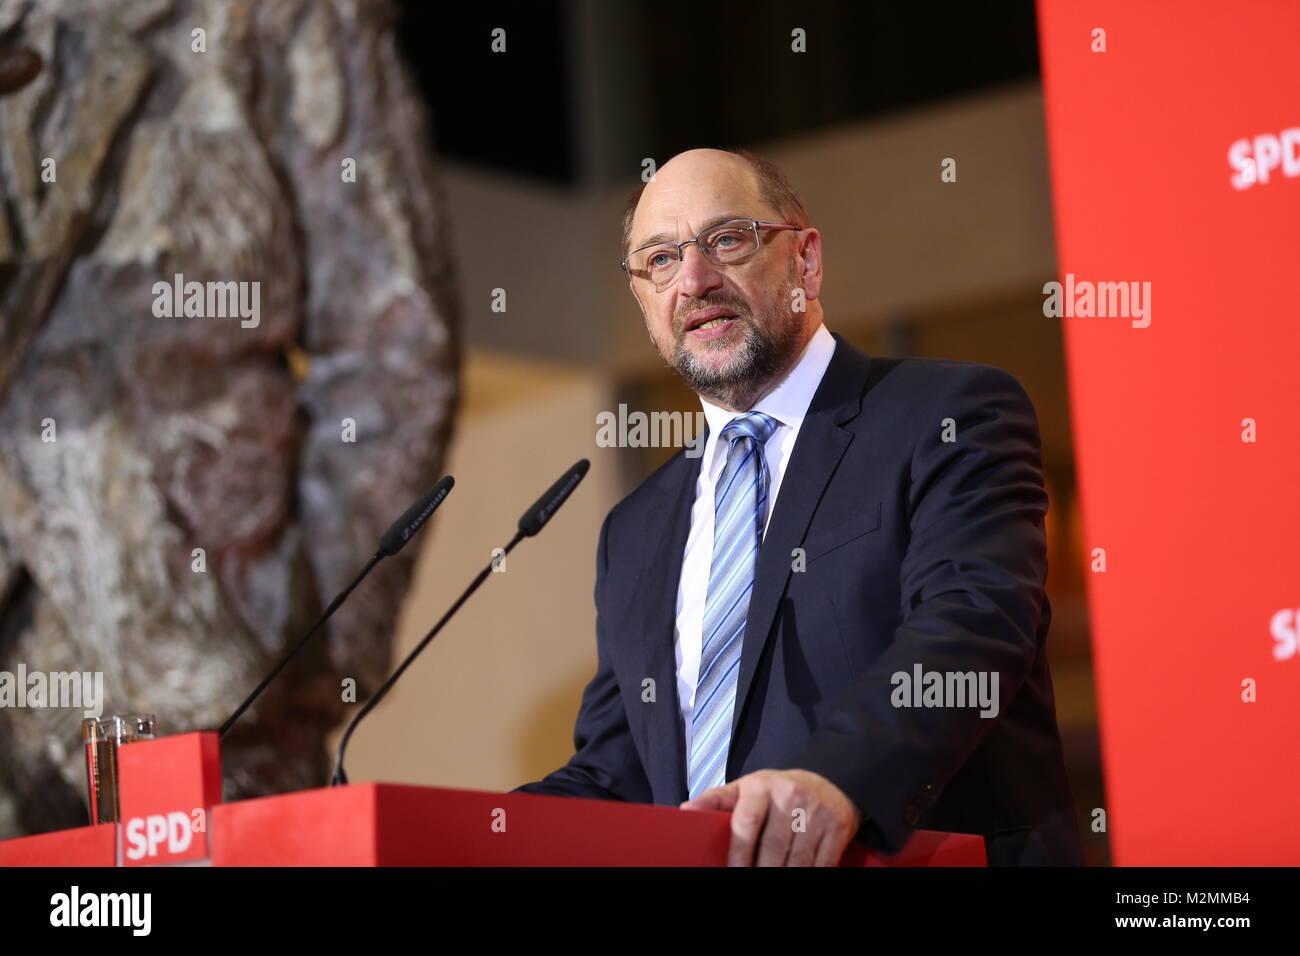 Berlin, Germany. 07th Feb, 2018. SPD leader Martin Schulz hands over the party chairmanship to parliamentary leader Andreas Nahles. Andrea Nahles would be the first woman at the head of the SPD party. A Credit: Simone Kuhlmey/Pacific Press/Alamy Live News Stock Photo